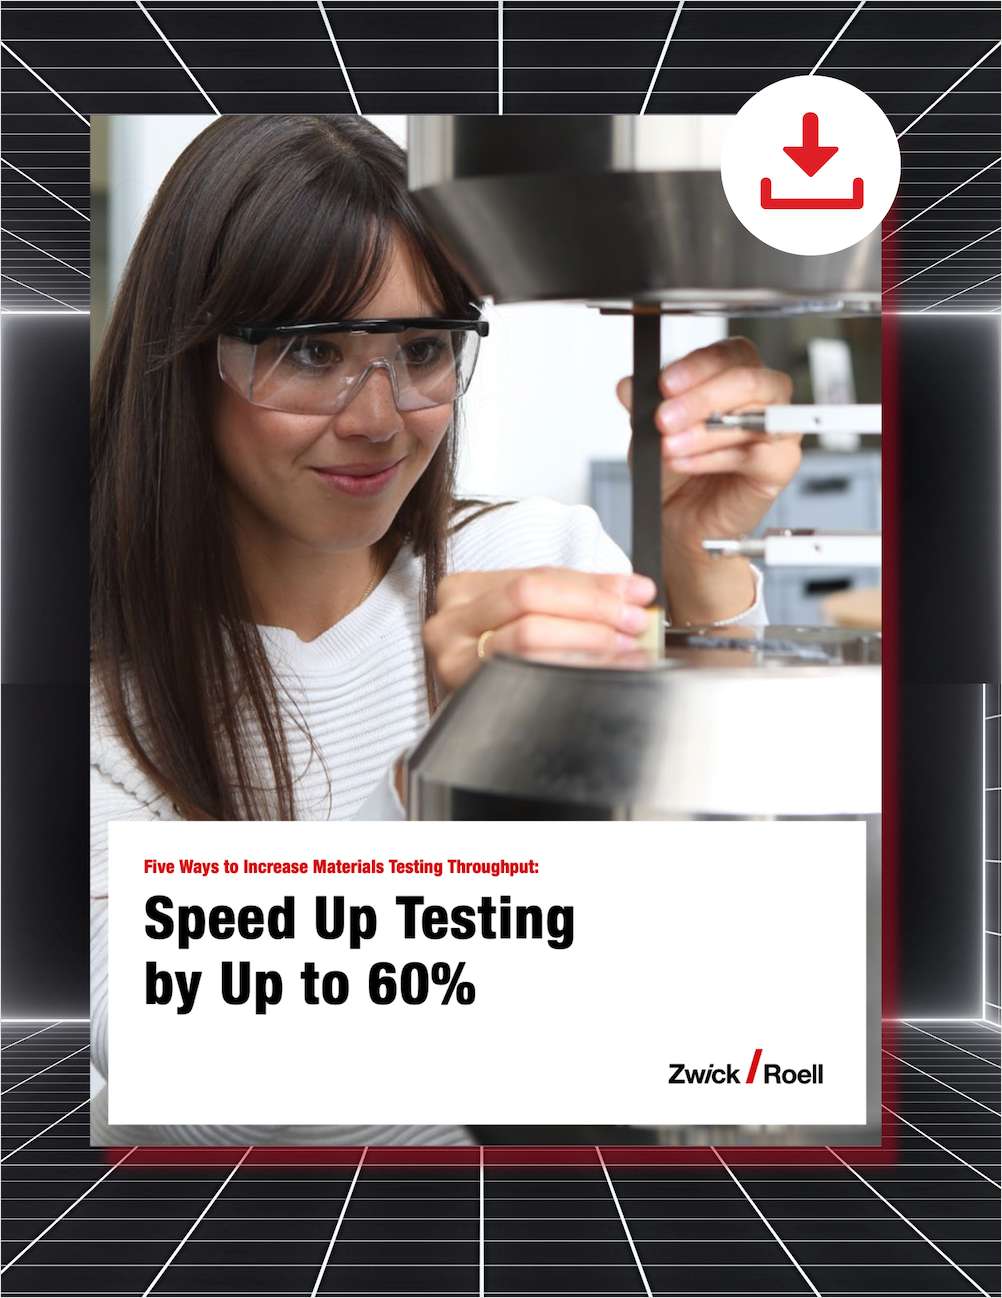 5 Ways to Increase Materials Testing Throughput: Speed Up Testing by Up to 60%